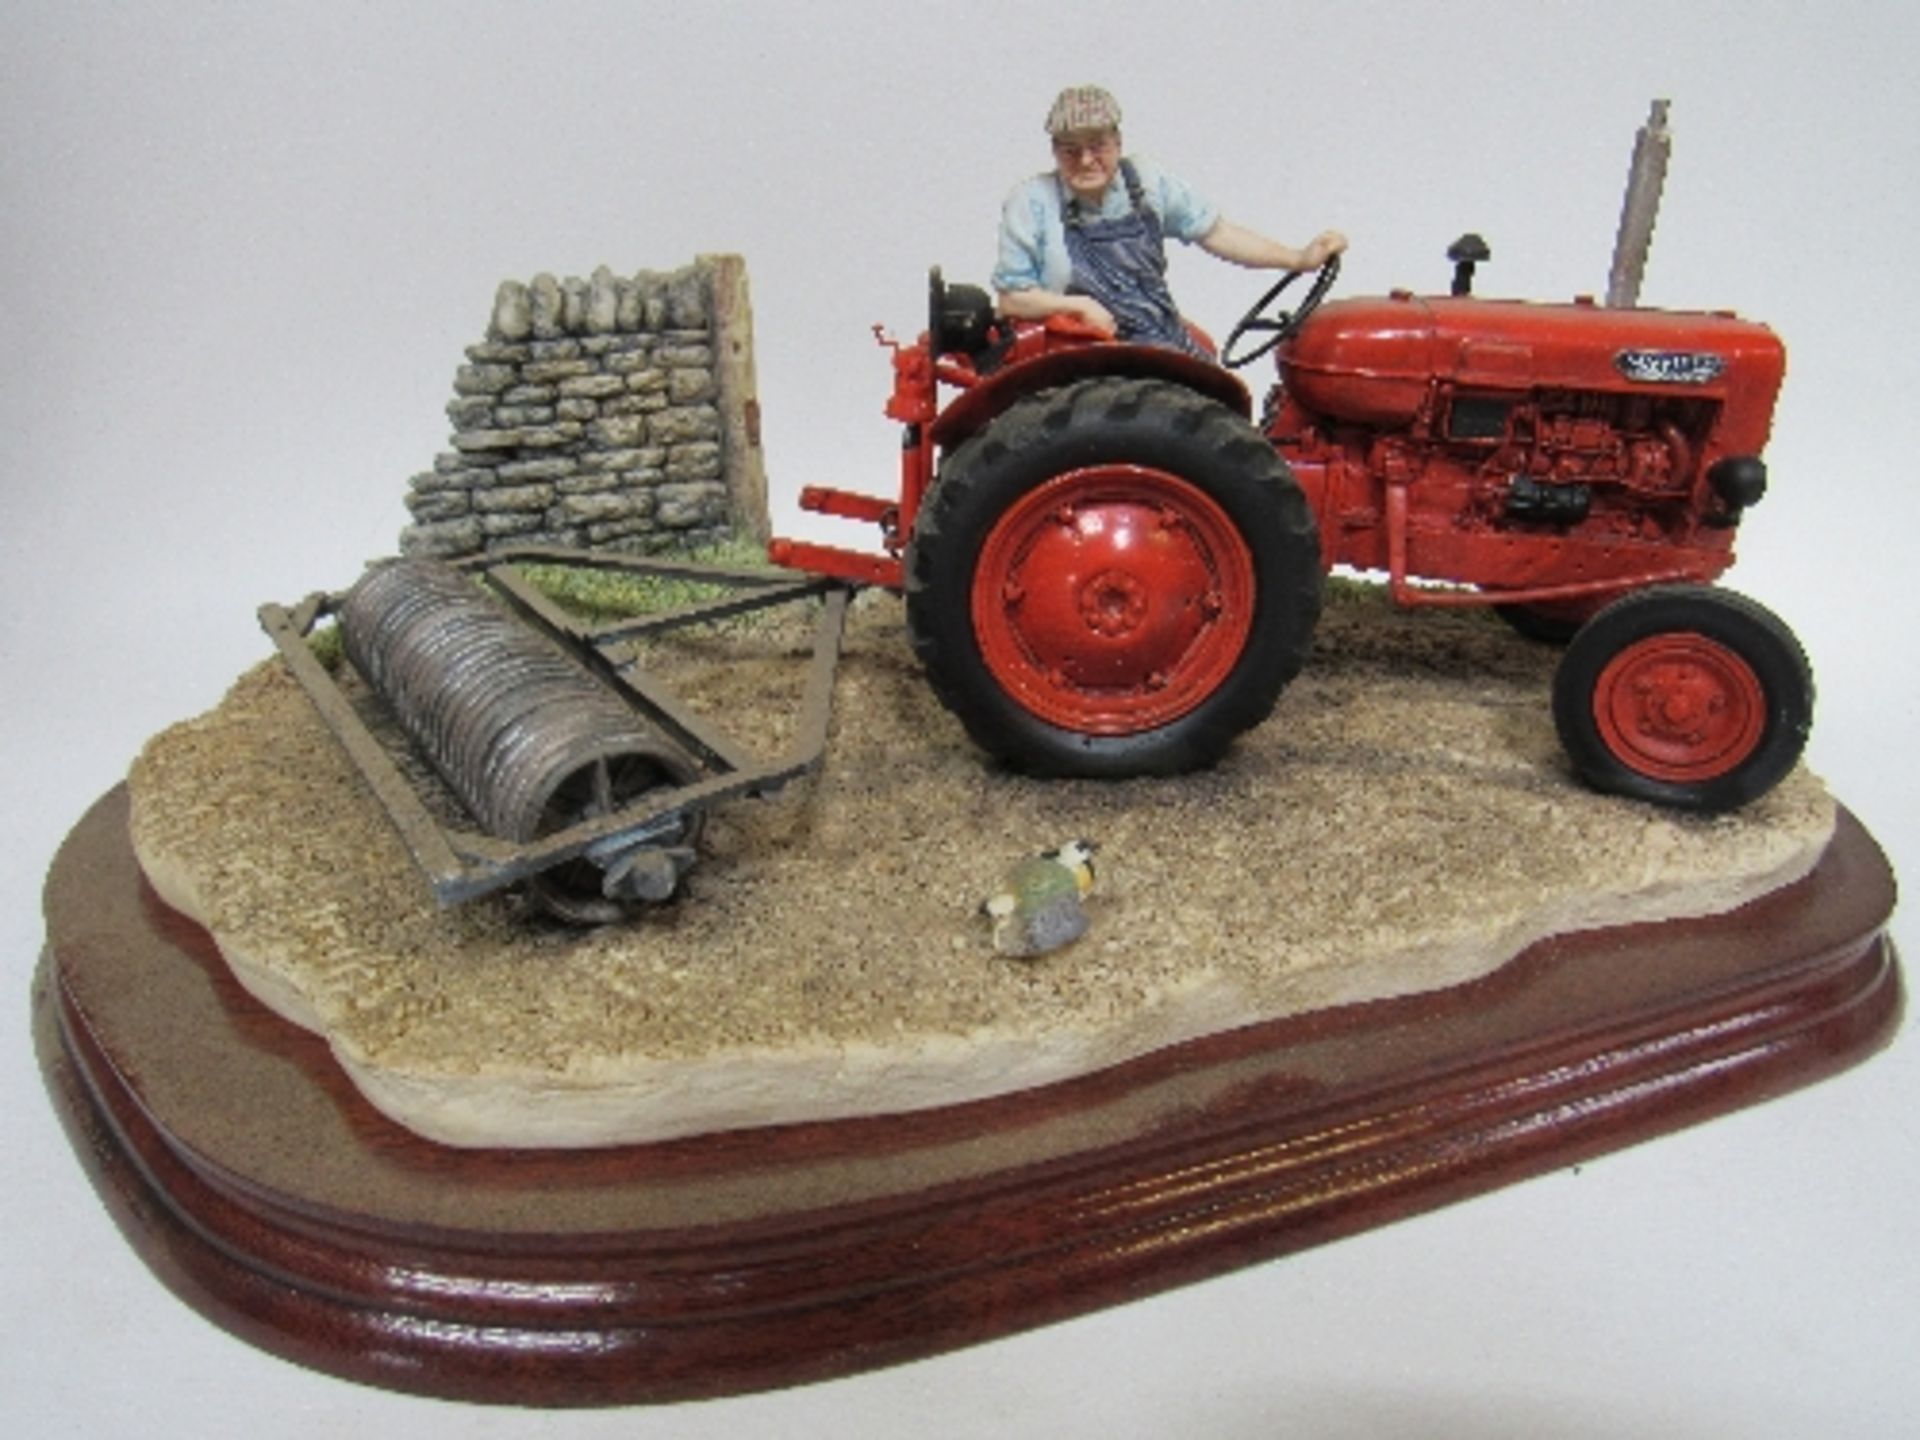 Border Fine Arts 'Turning with Care' Nuffield Tractor limited edition 1277 of 1750 Model B0094 - Image 3 of 5